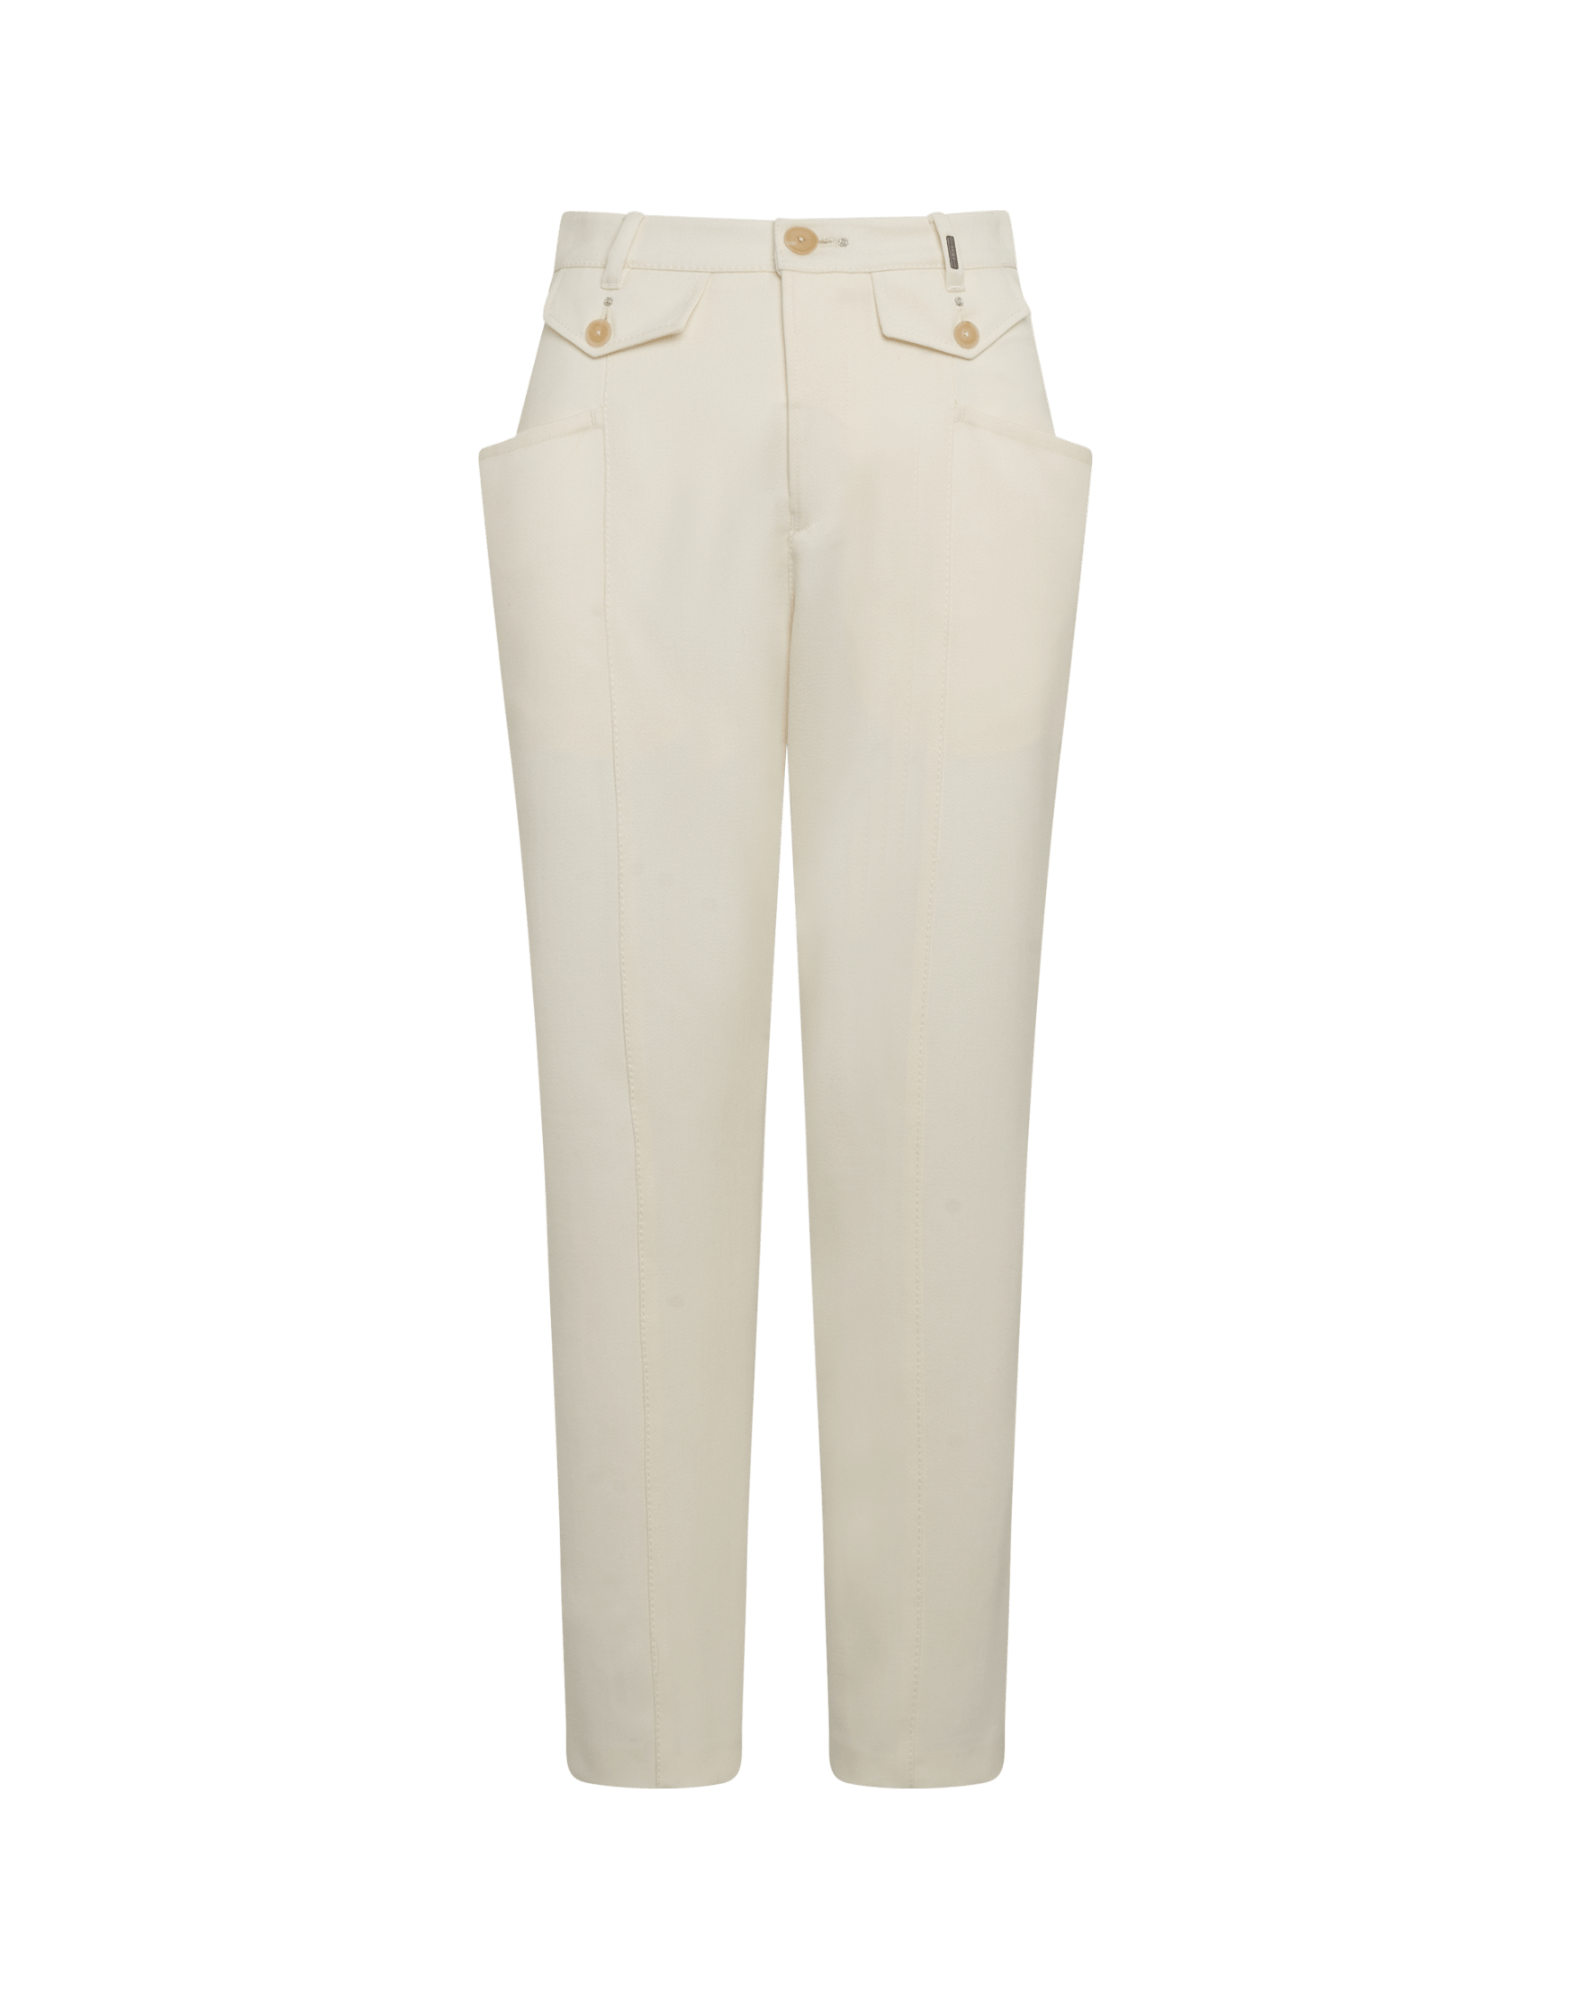 White Pants with Tan Suede Shoes Smart Casual Winter Outfits For